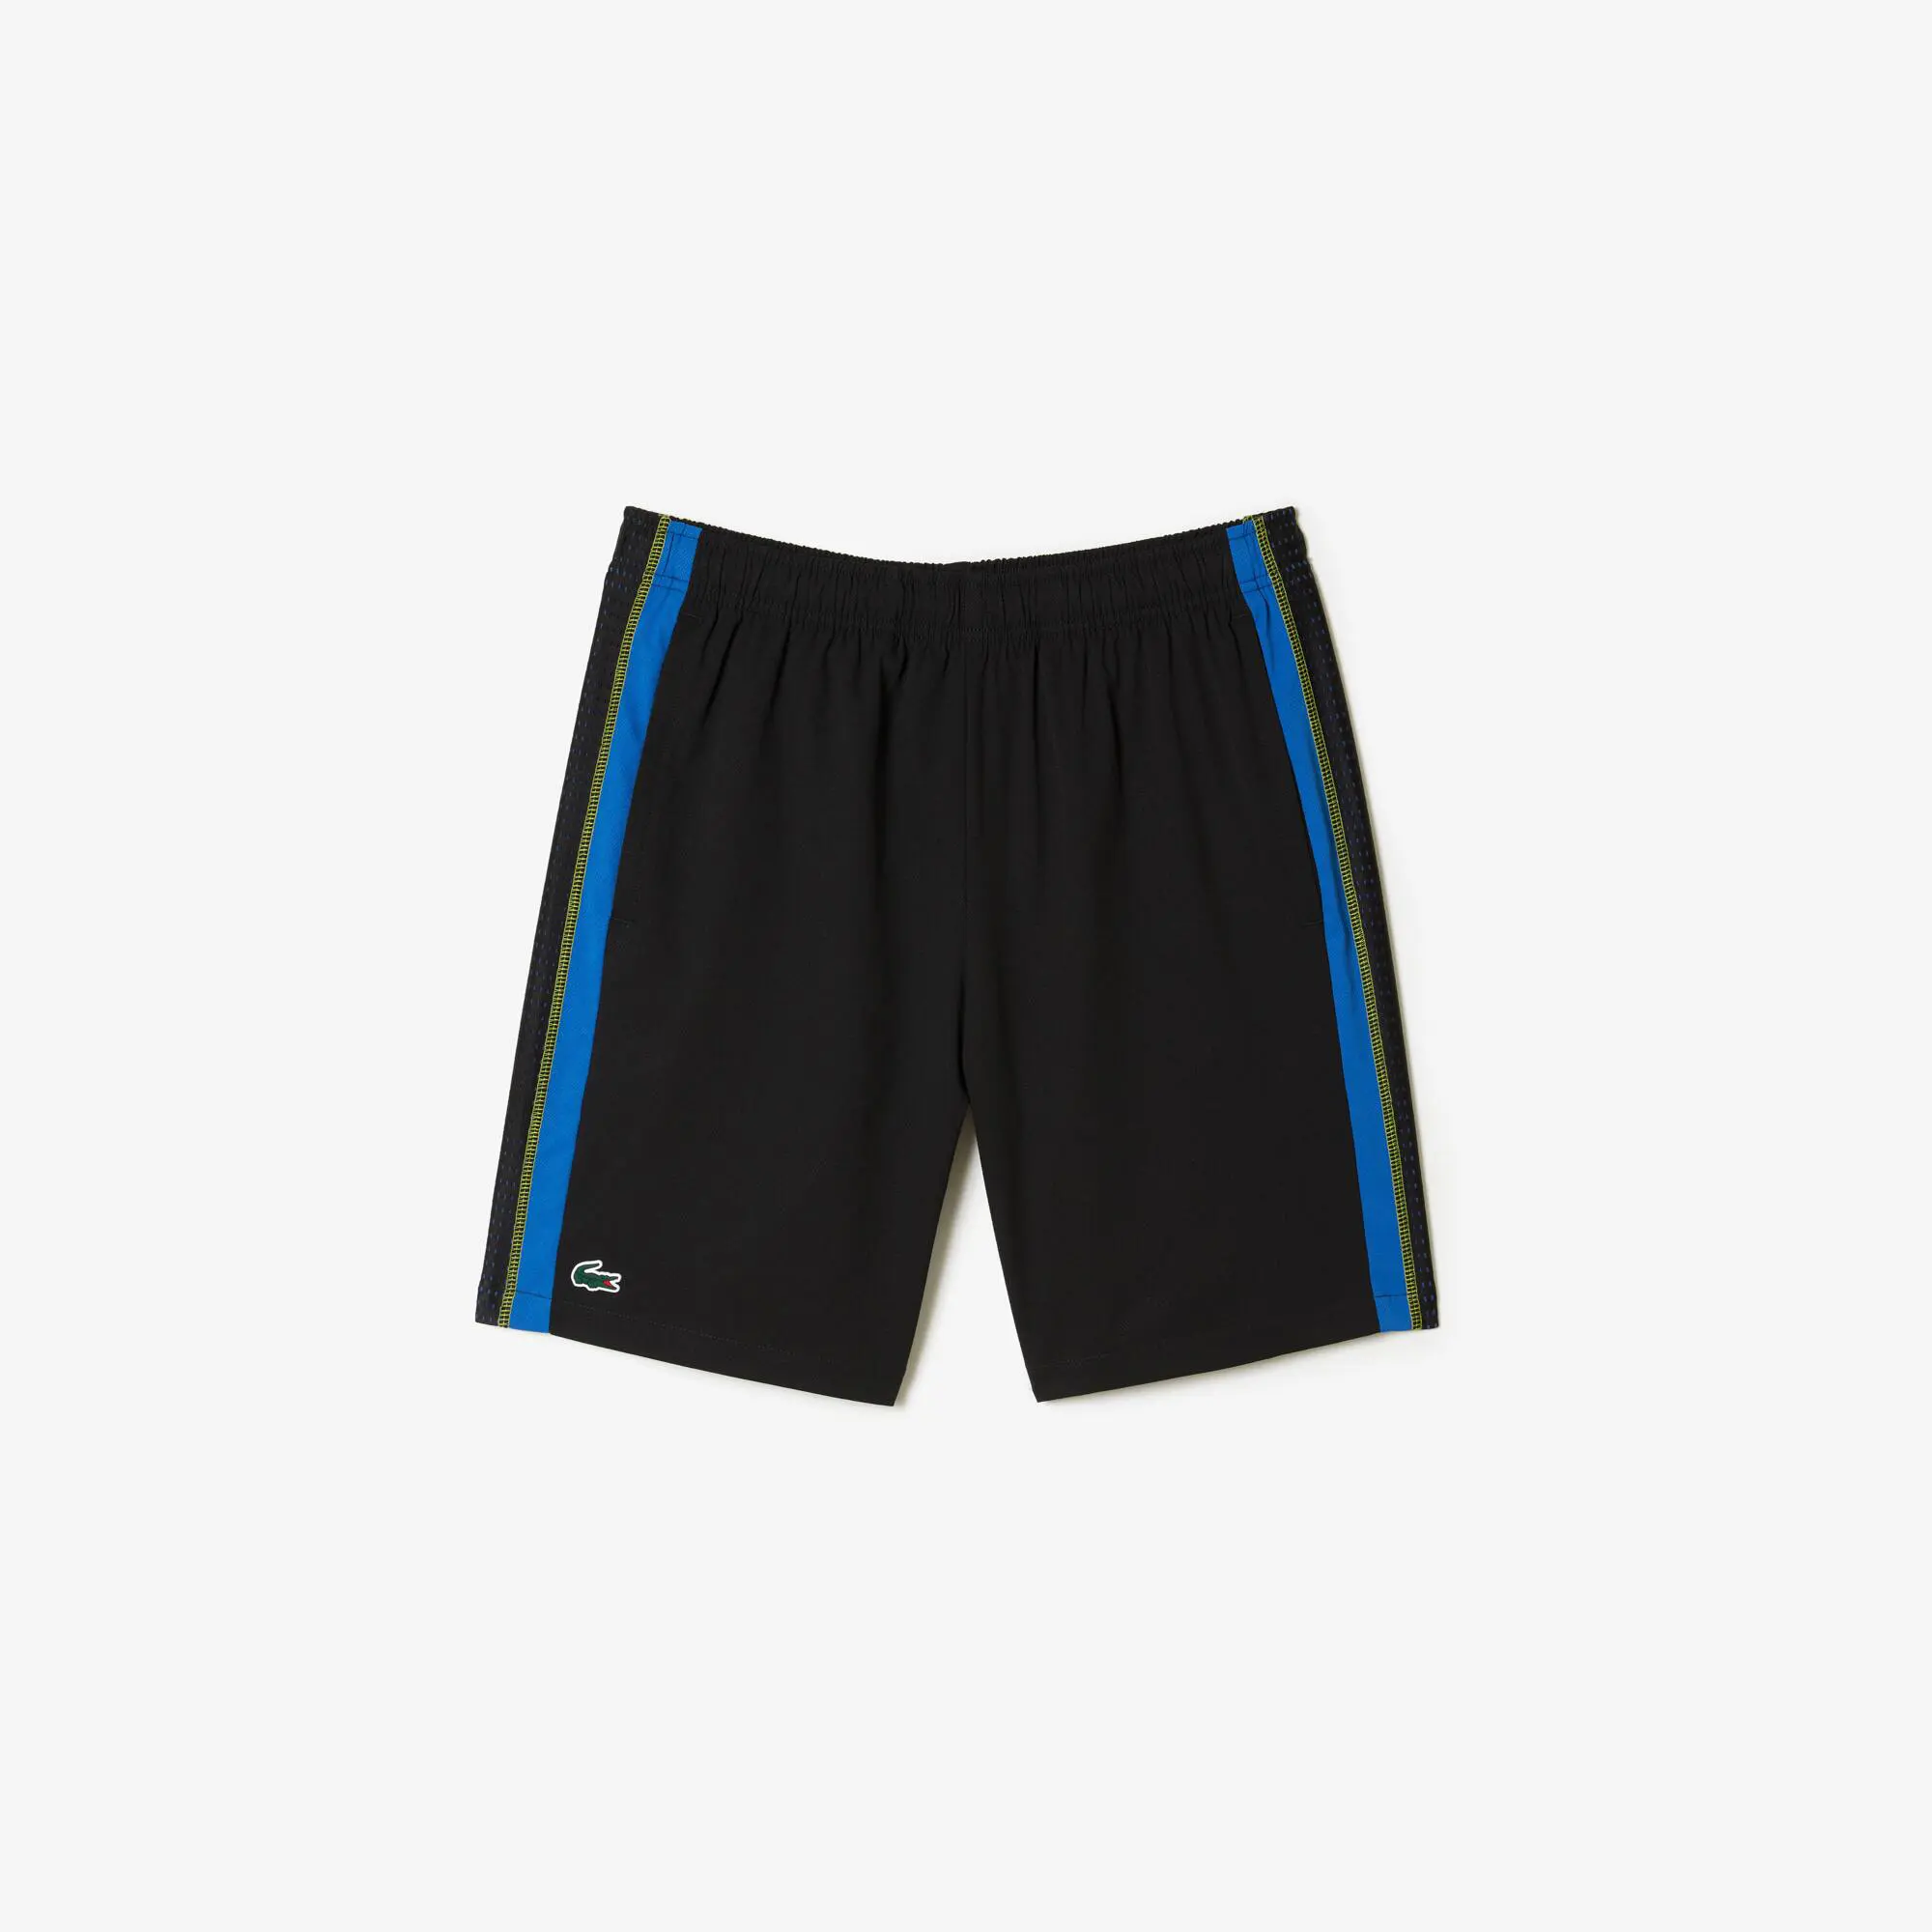 Lacoste Men’s Lacoste Recycled Polyester Tennis Shorts. 2